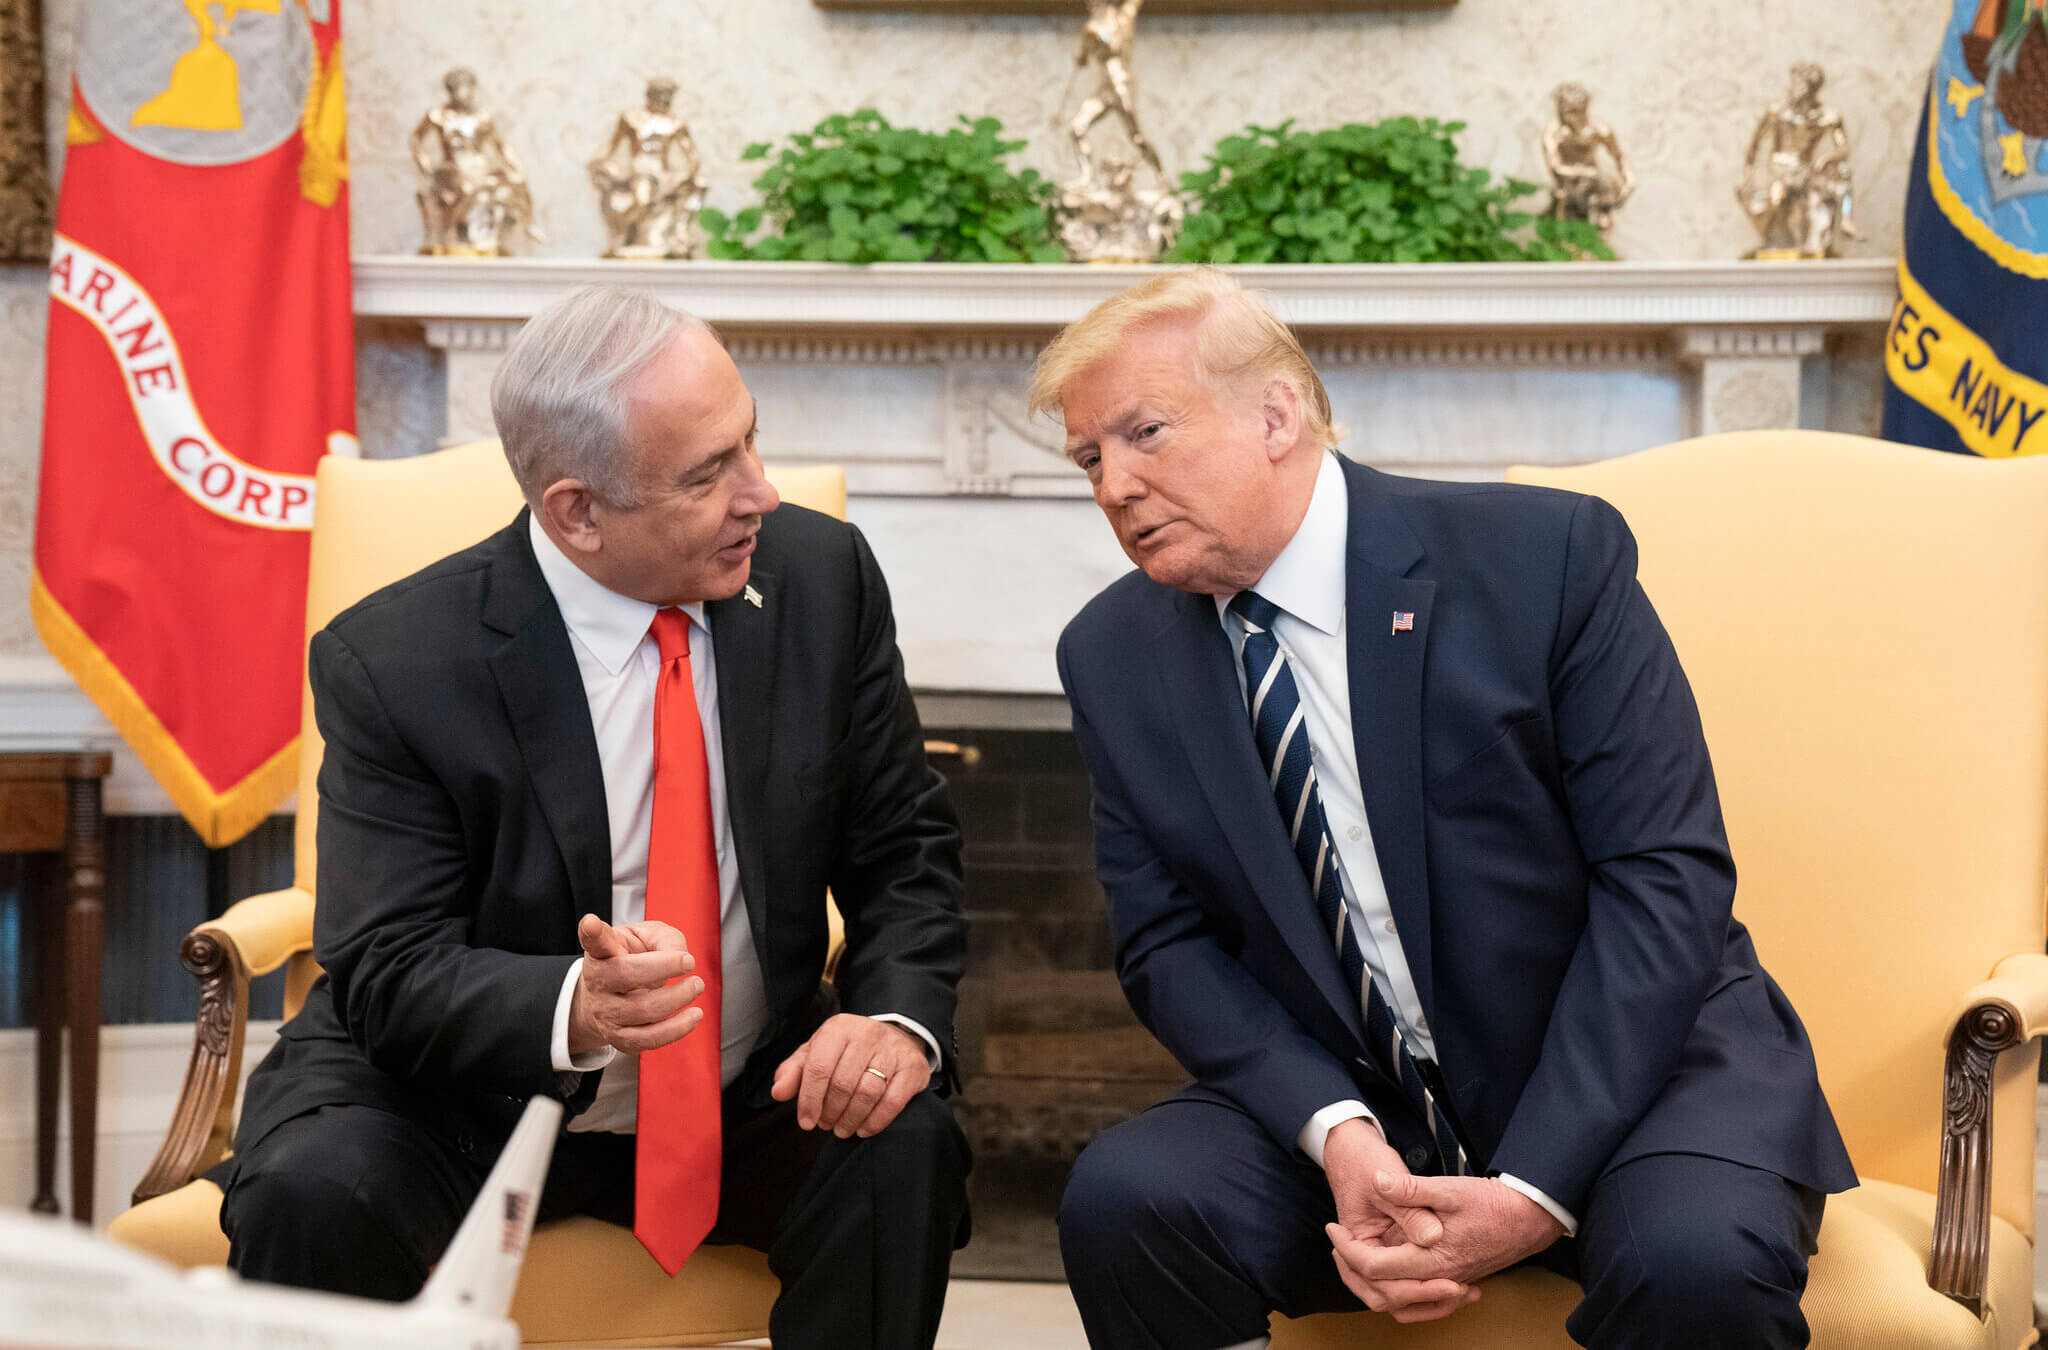 President Donald J. Trump participates in a bilateral meeting with Israeli Prime Minister Benjamin Netanyahu in the Oval Office on Jan. 27, 2020.